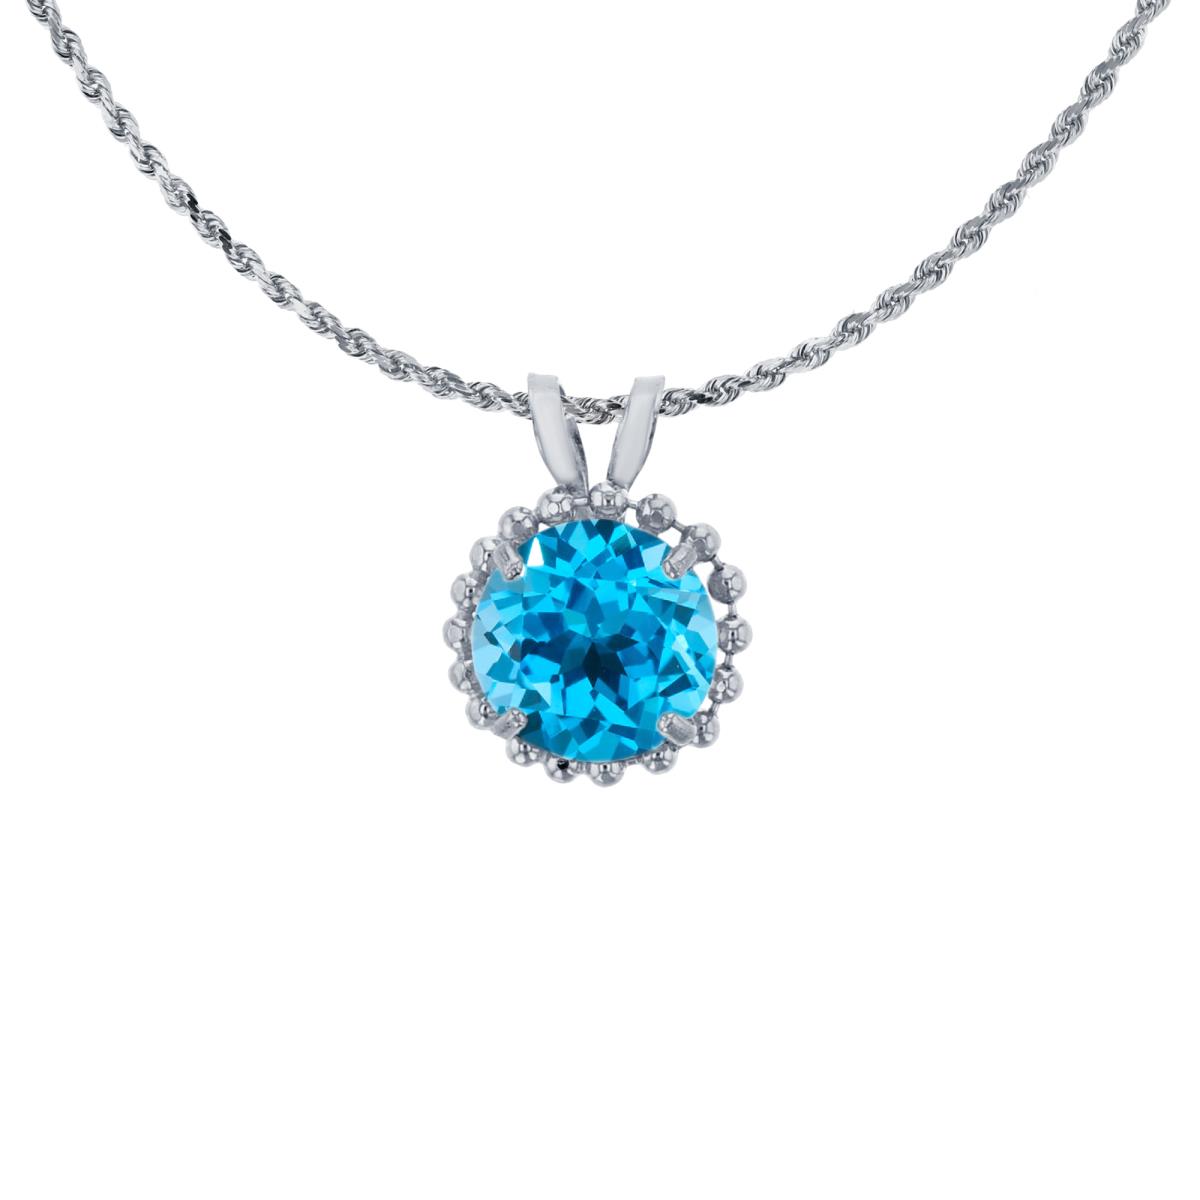 10K White Gold 6mm Rd Cut Swiss Blue Topaz with Bead Frame Rabbit Ear 18" Necklace